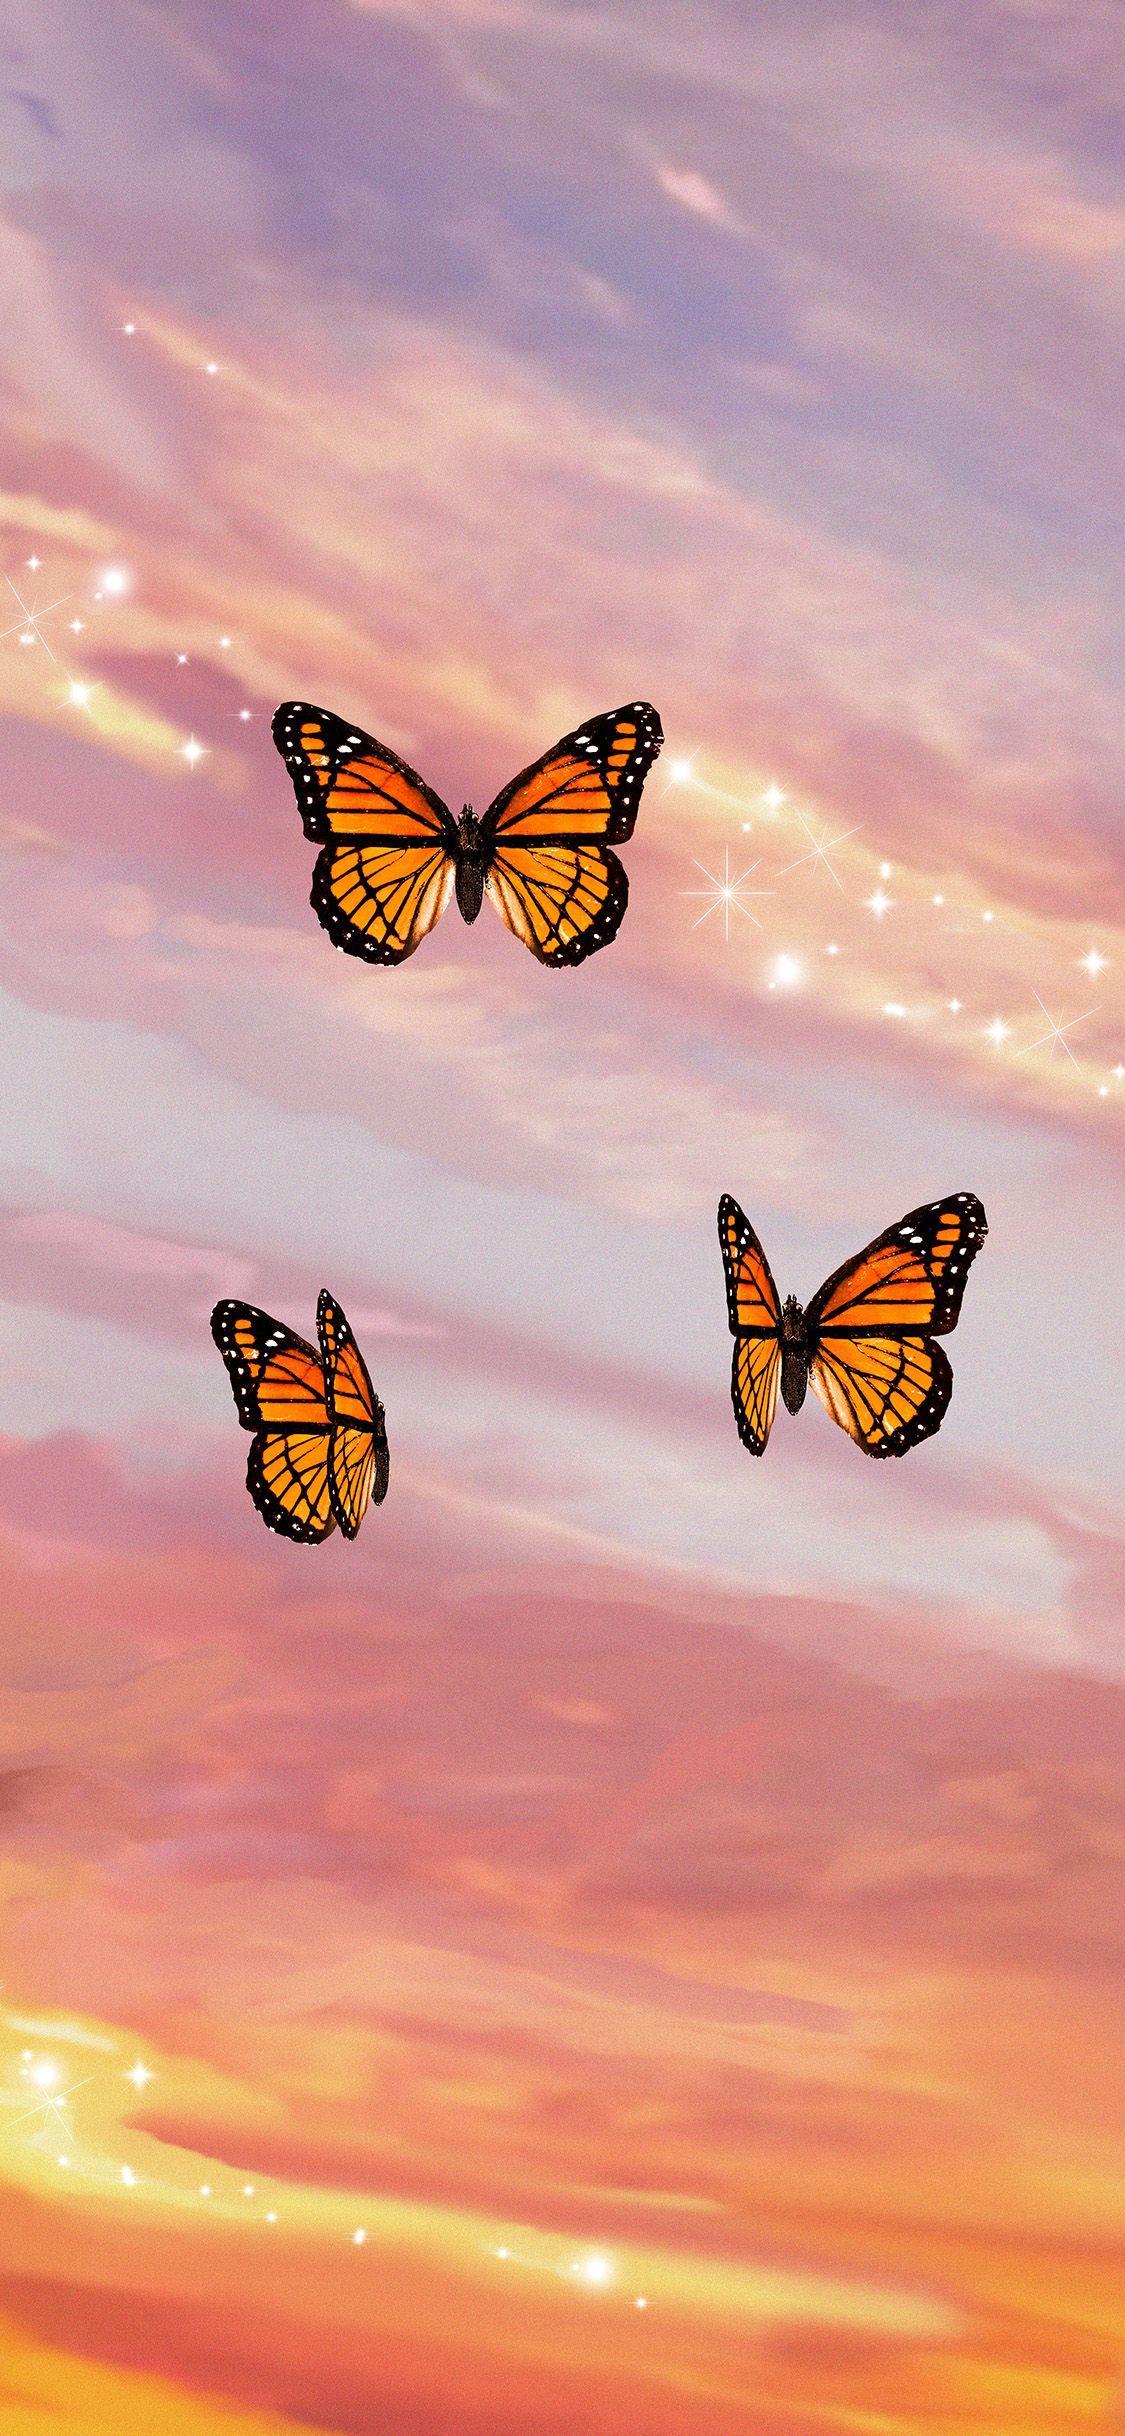 Butterfly Sunset Wallpapers - Top Free Butterfly Sunset Backgrounds